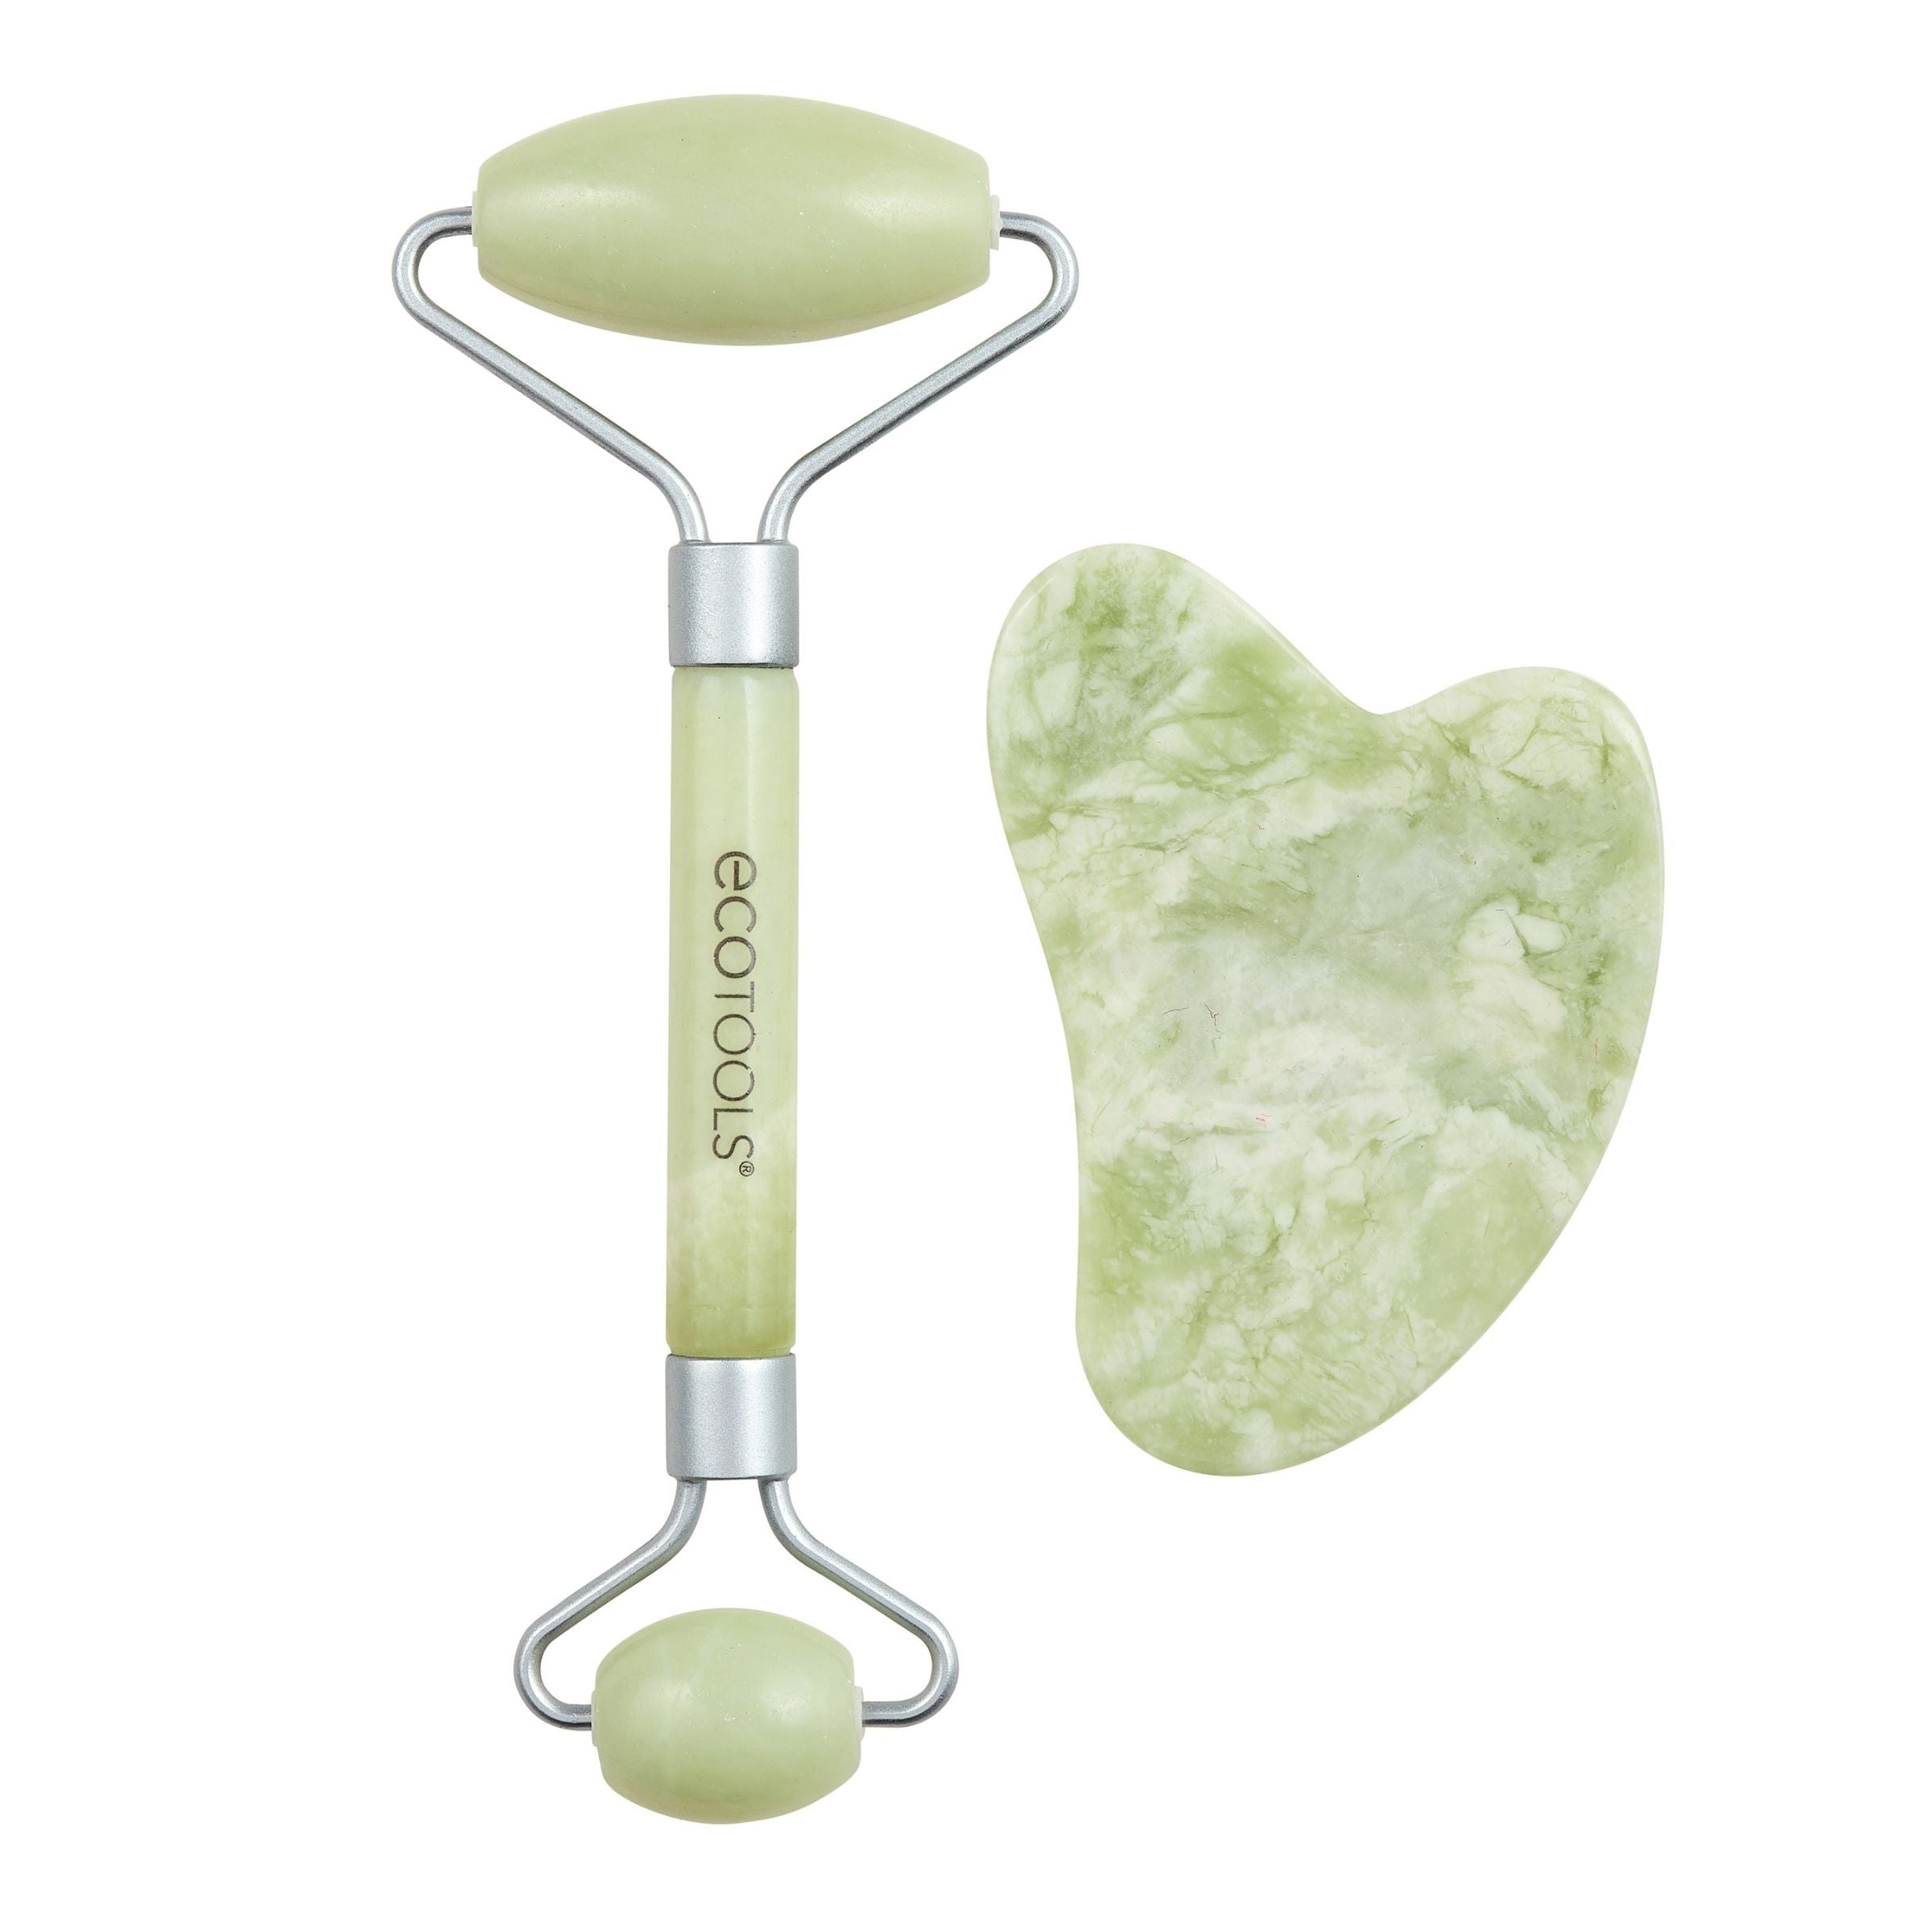 Face massage roller: Our go-to jade rollers and Gua Sha